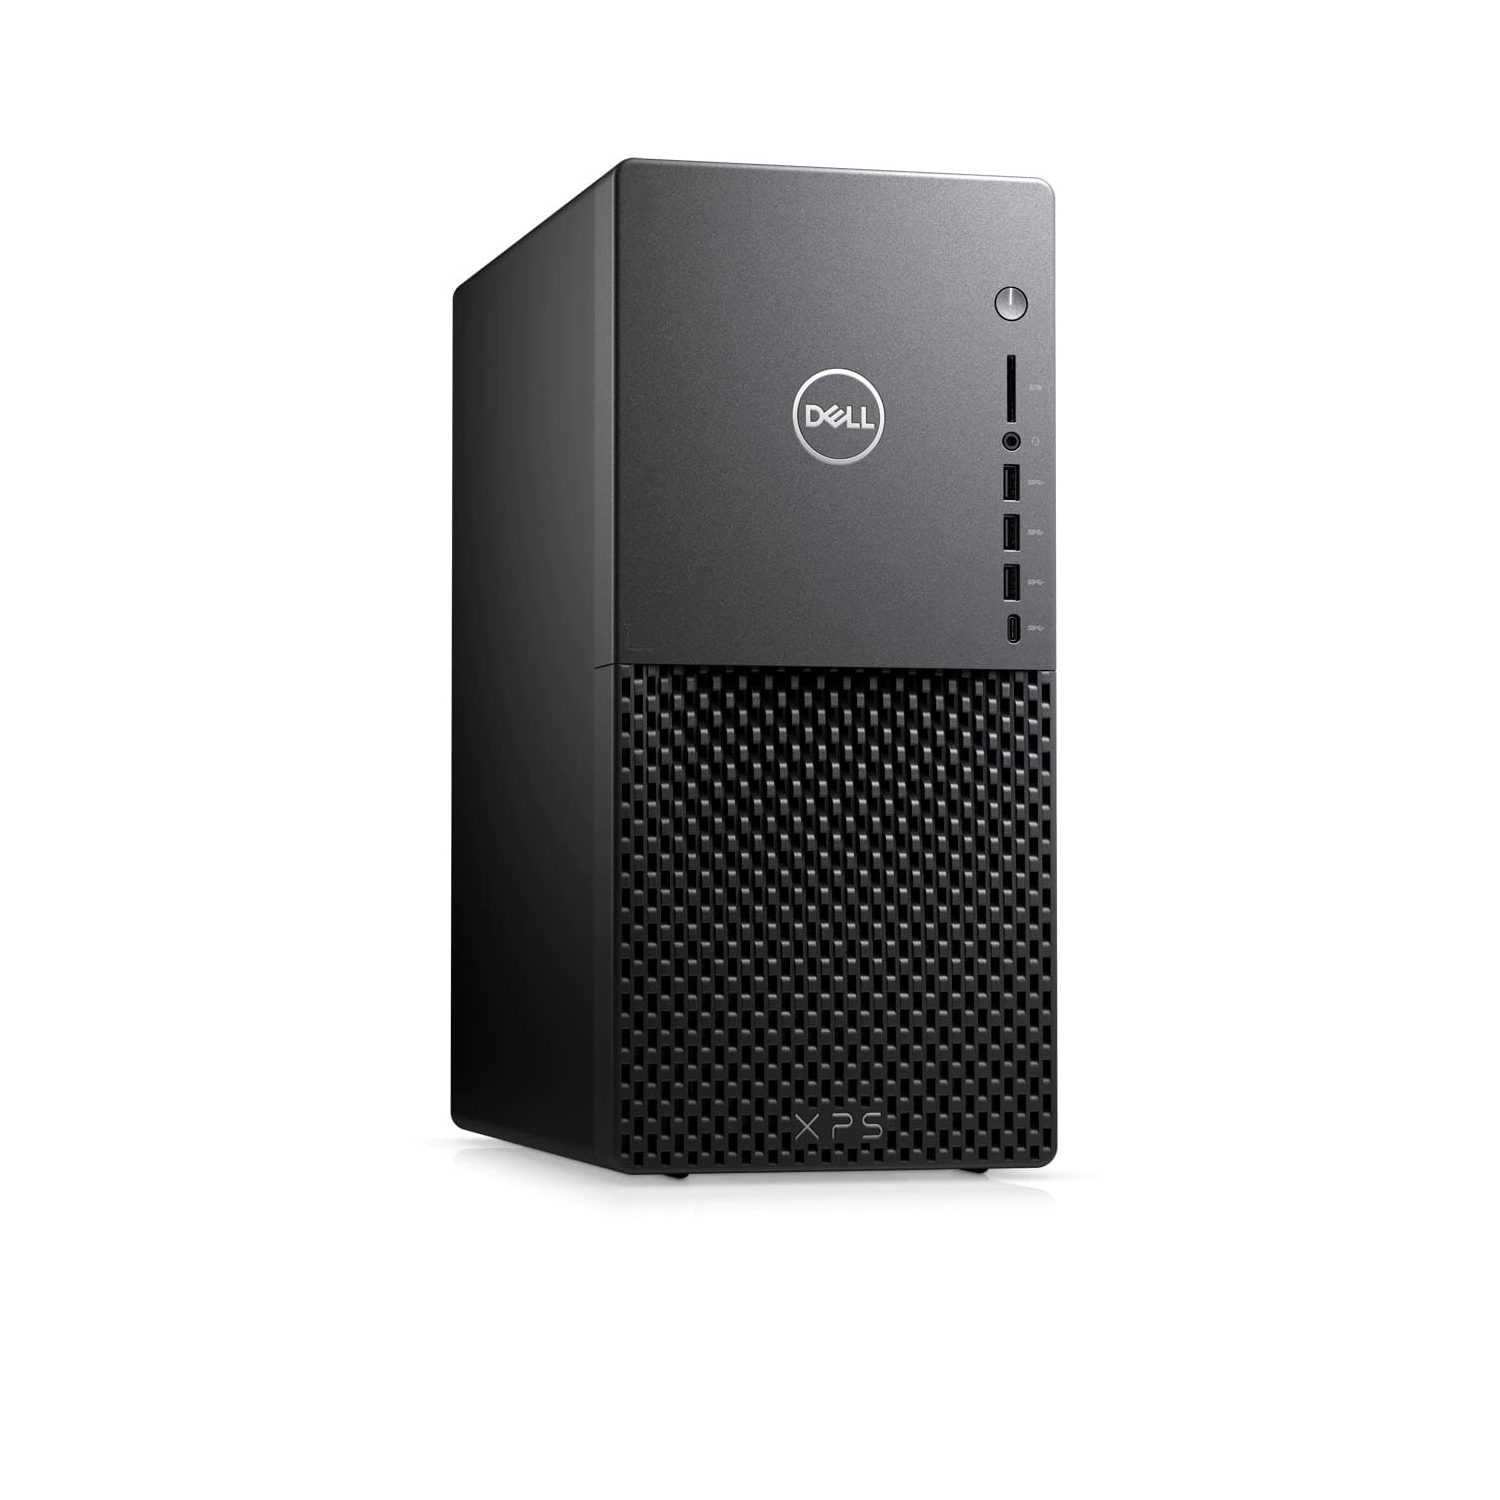 Refurbished (Excellent) - Dell XPS 8940 Desktop (2020) | Core i7 - 1TB HDD + 512GB SSD - 32GB RAM - 3060 Ti | 8 Cores @ 4.8 GHz - 10th Gen CPU Certified Refurbished